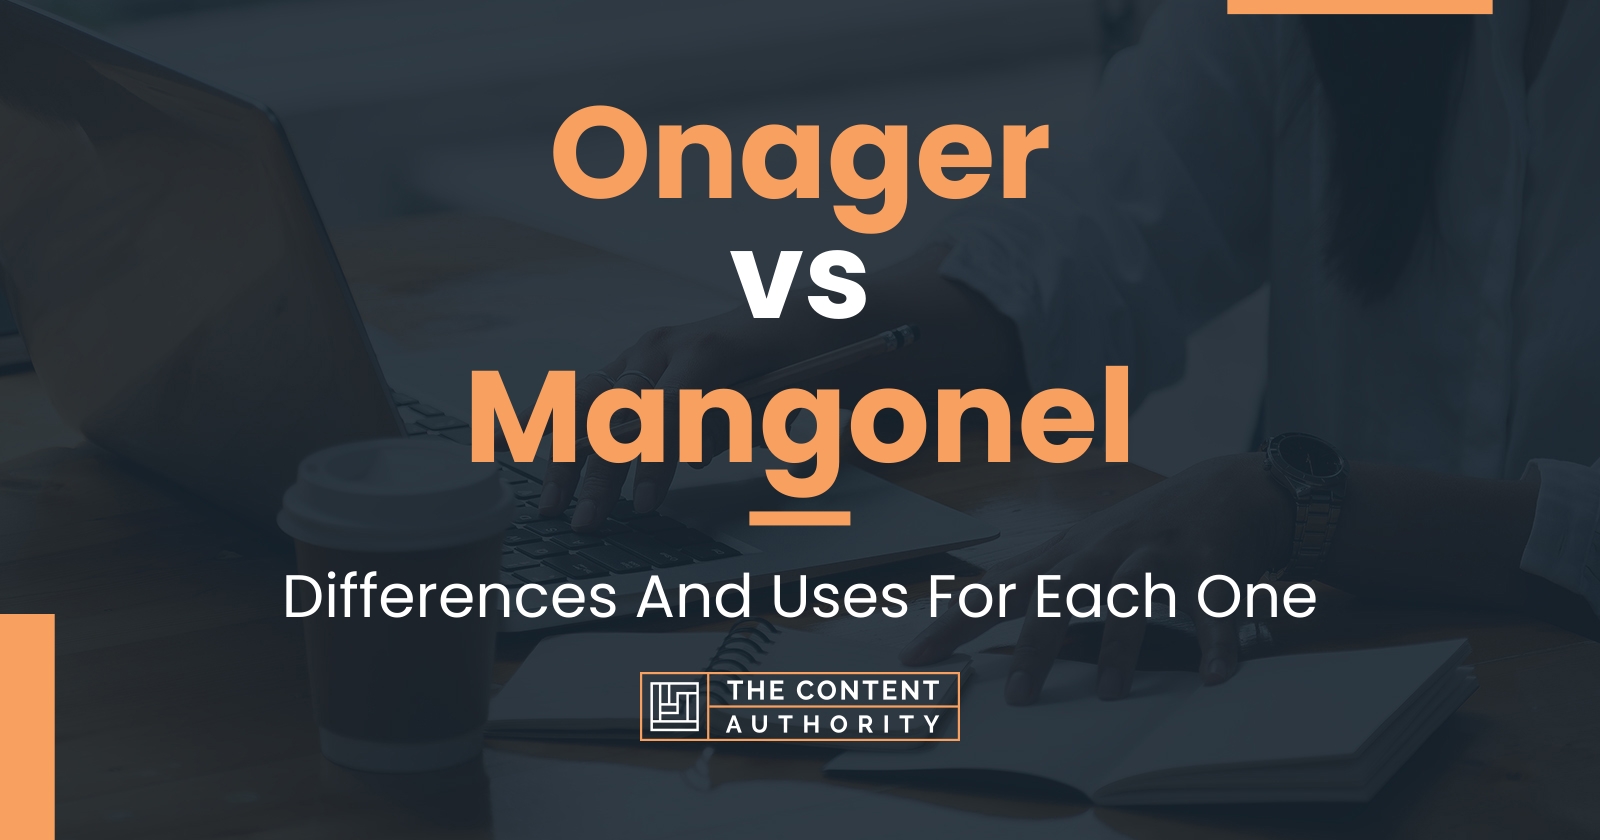 Onager vs Mangonel: Differences And Uses For Each One